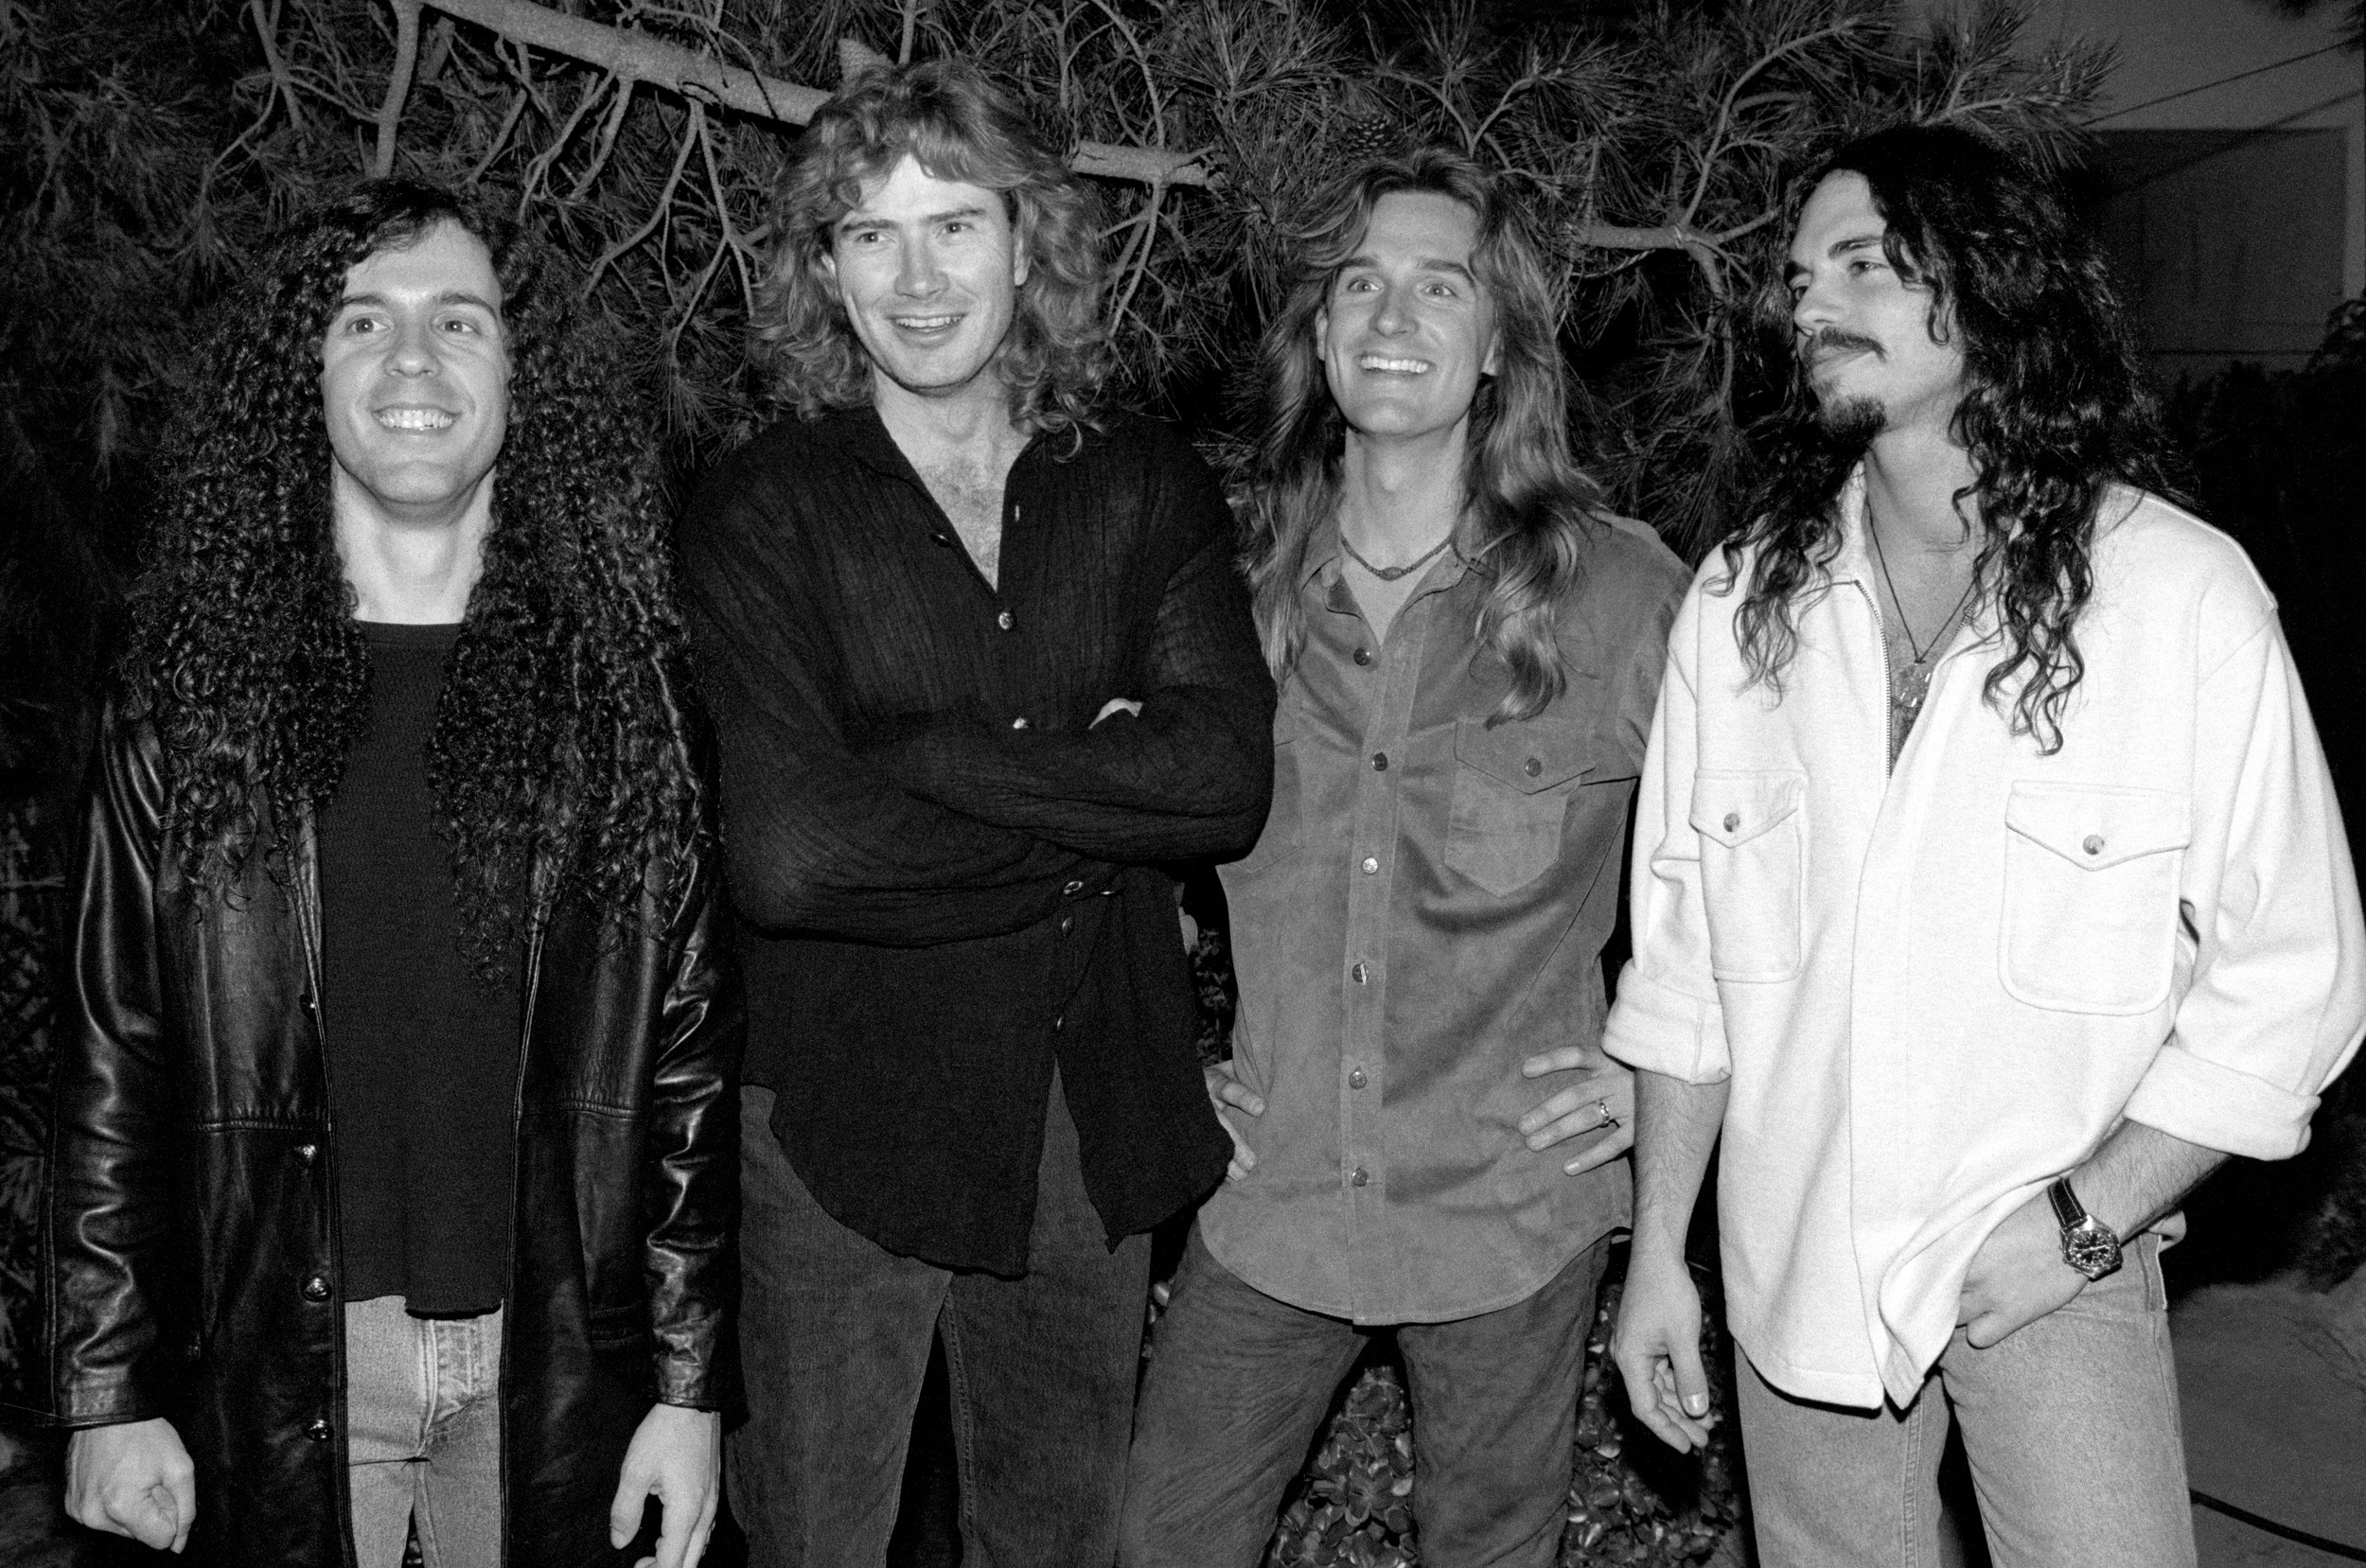 <p>It's easy to look back and ask what should've been done differently. Should Megadeth have cut their hair? Should they have waited another year or two for their next album? On <em>Youthanasia</em>, we're seeing the last gasp of the <em>Rust In Peace</em> lineup of Megadeth, they had one more album in them, but it didn't really work out for them. In its time, <em>Youthanasia </em>didn't sell well when compared to their breakthrough <em>Countdown To Extinction</em>, but today a lot of fans consider it one of their most intelligent and listenable records. Unfortunately, the popular music landscape had already largely moved on and couldn't be bothered.</p><p>You may also like: <a href='https://www.yardbarker.com/entertainment/articles/20_famous_models_discovered_in_everyday_life/s1__40212666'>20 famous models discovered in everyday life</a></p>